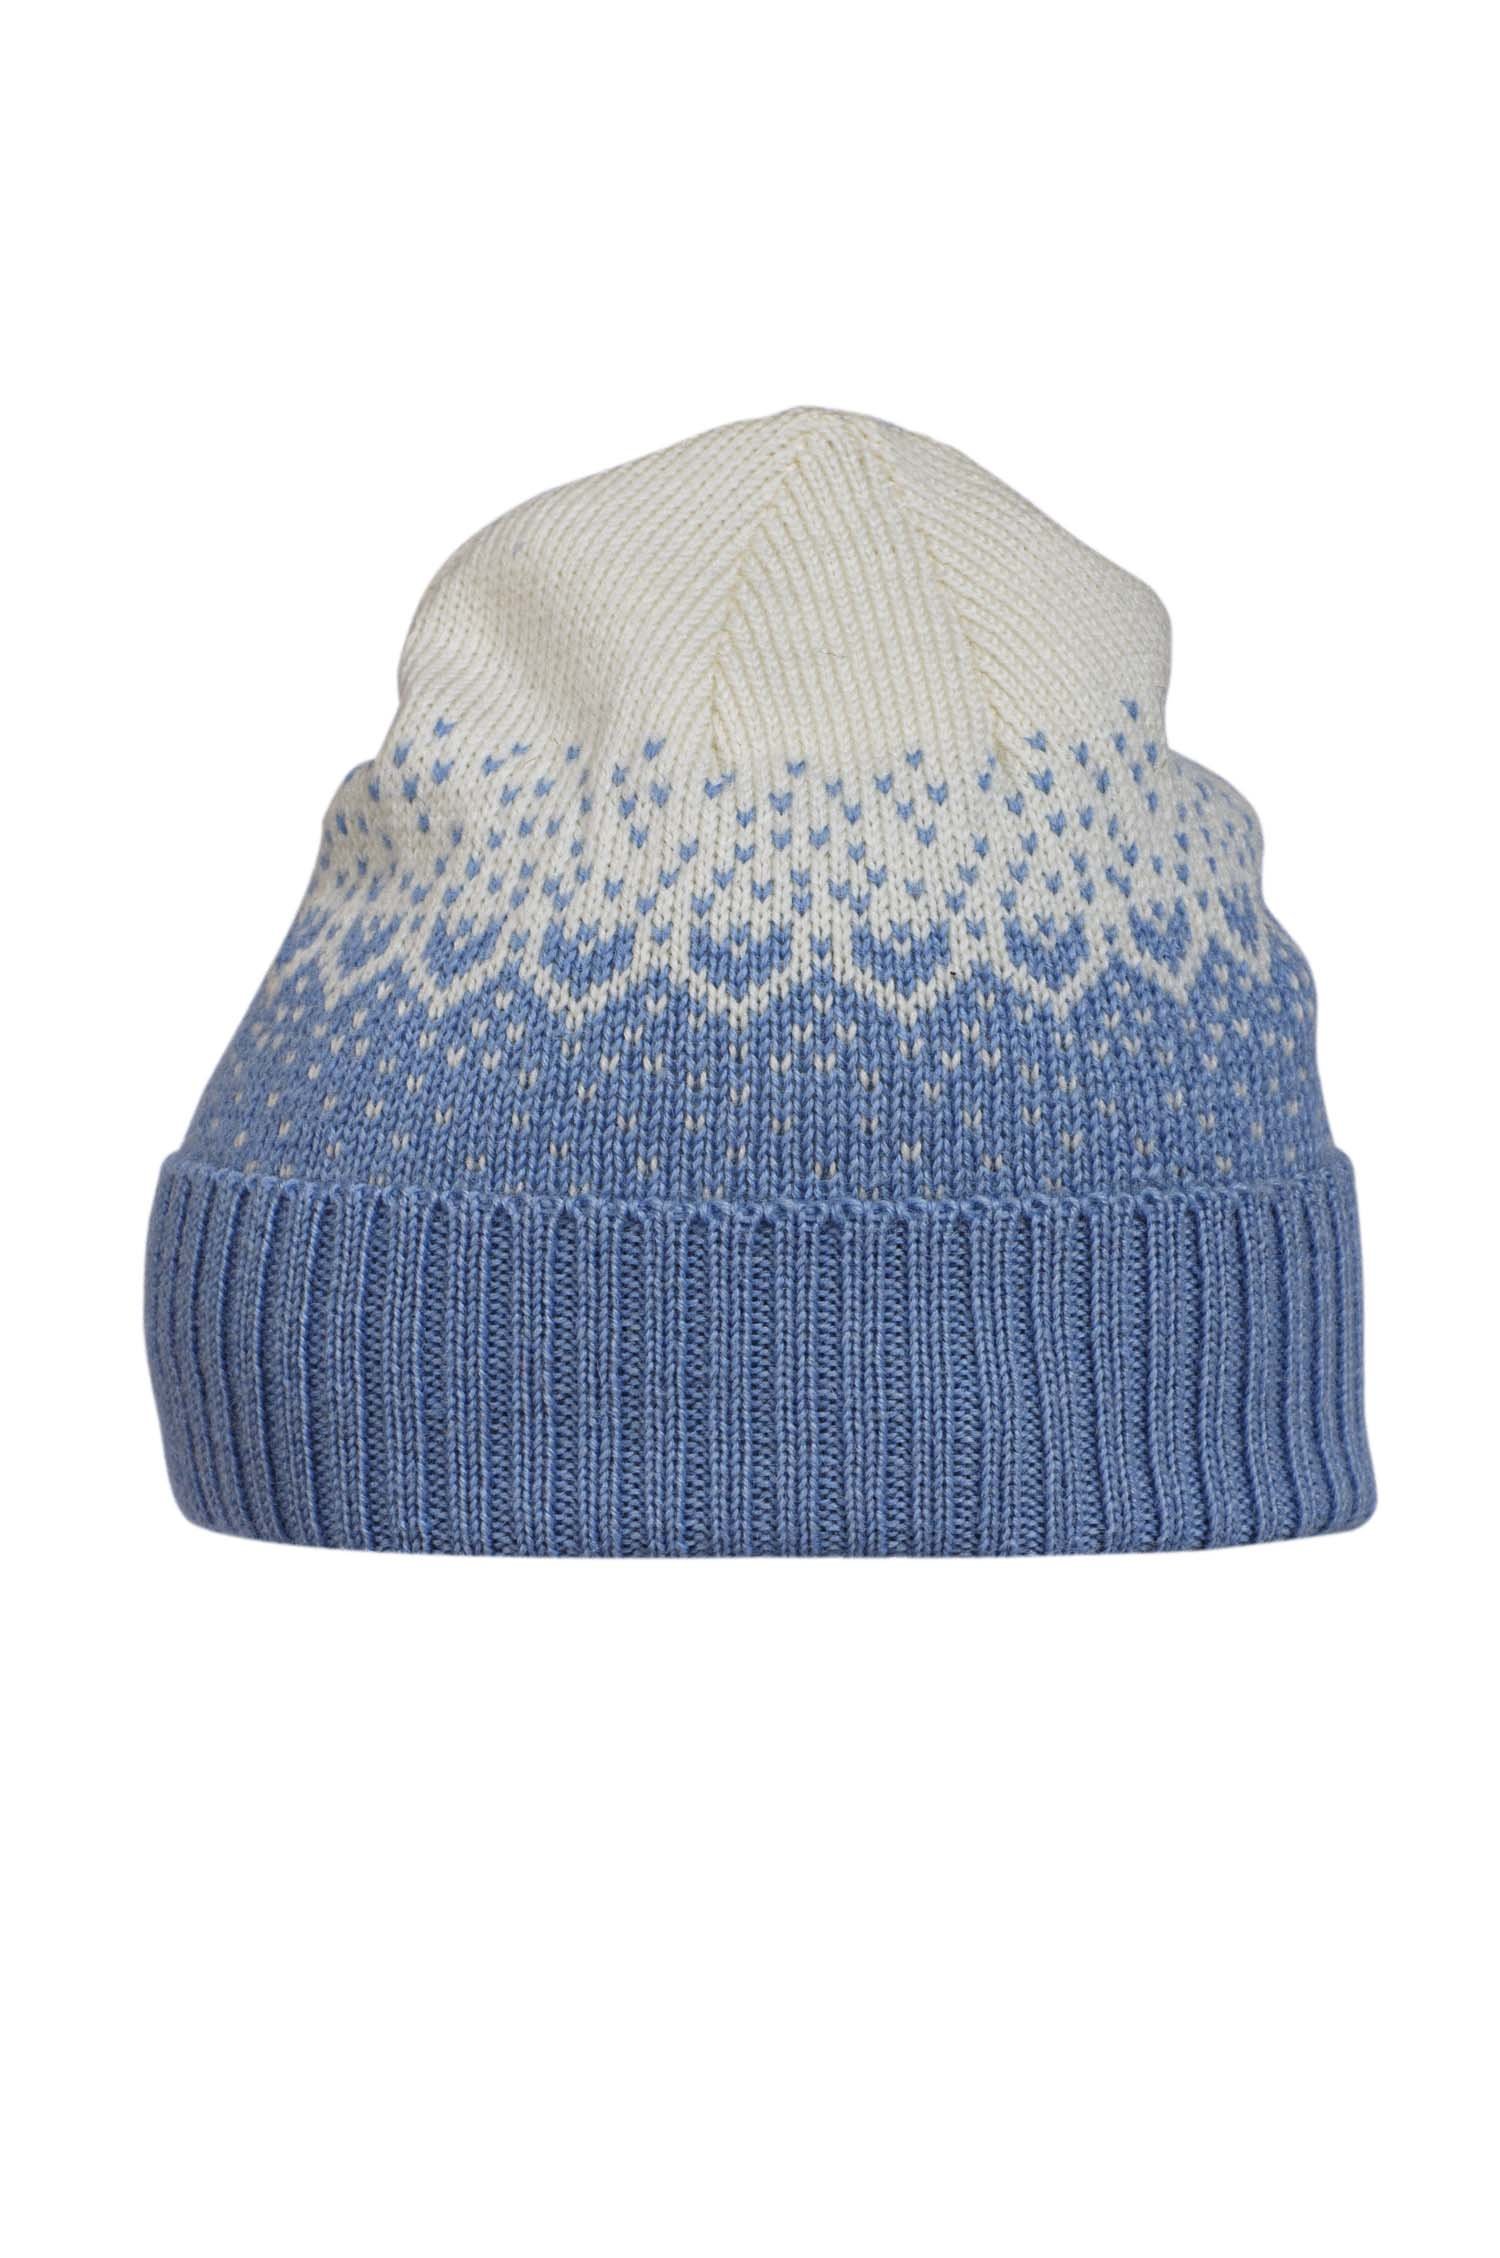 Norlender Knitwear — Colorful knitted wool beanie